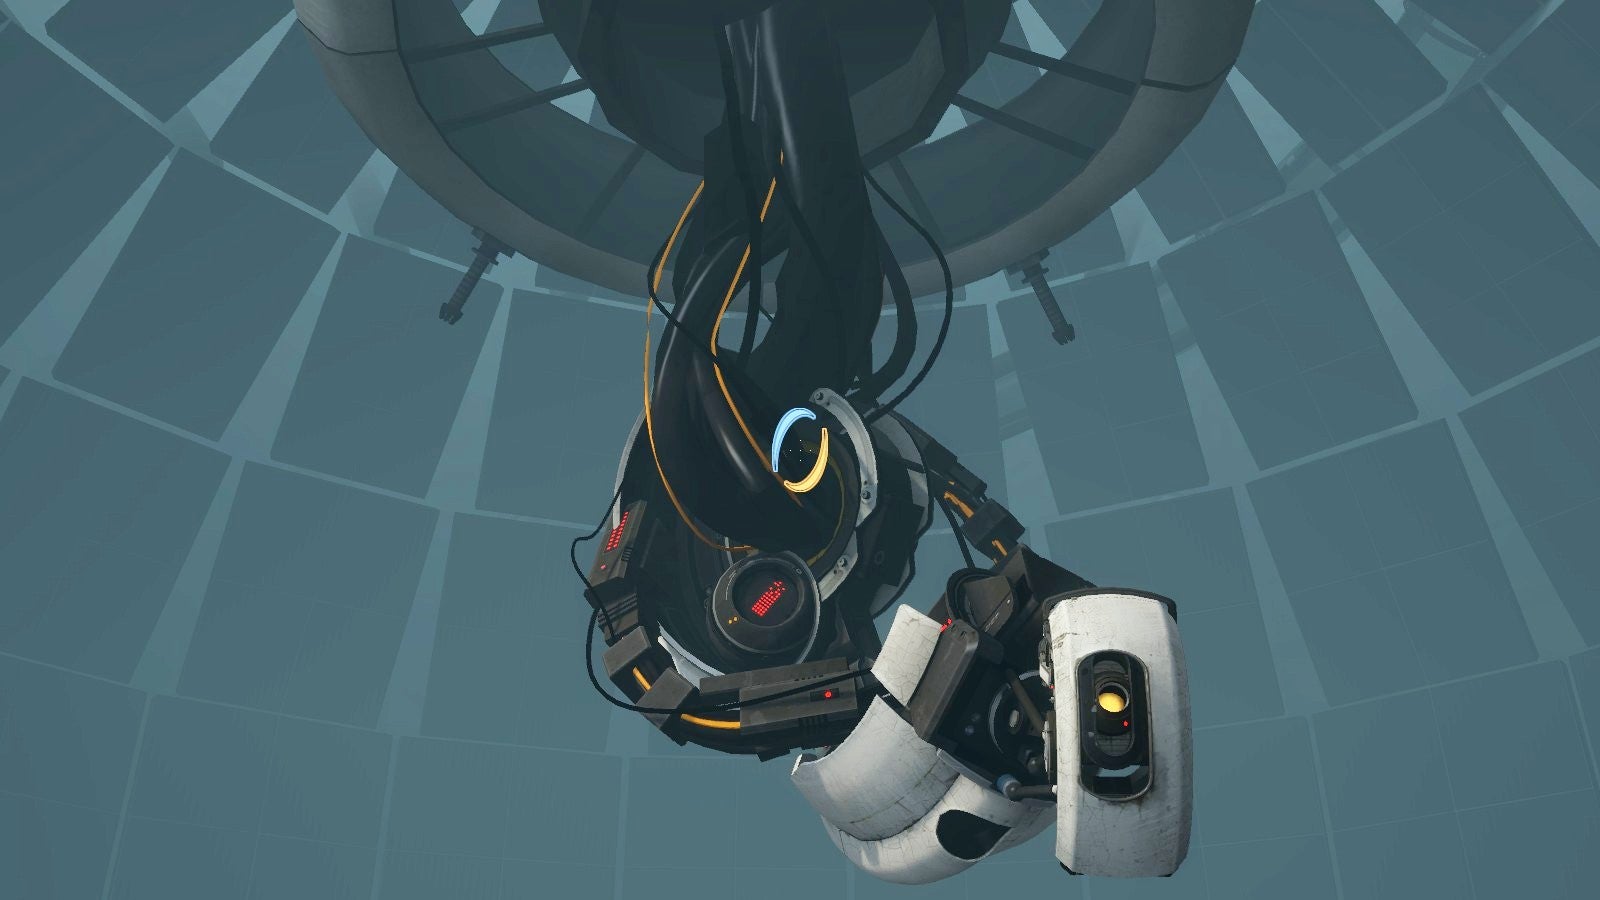 Image for Portal's tricksy world plucks at some fascinating video game threads